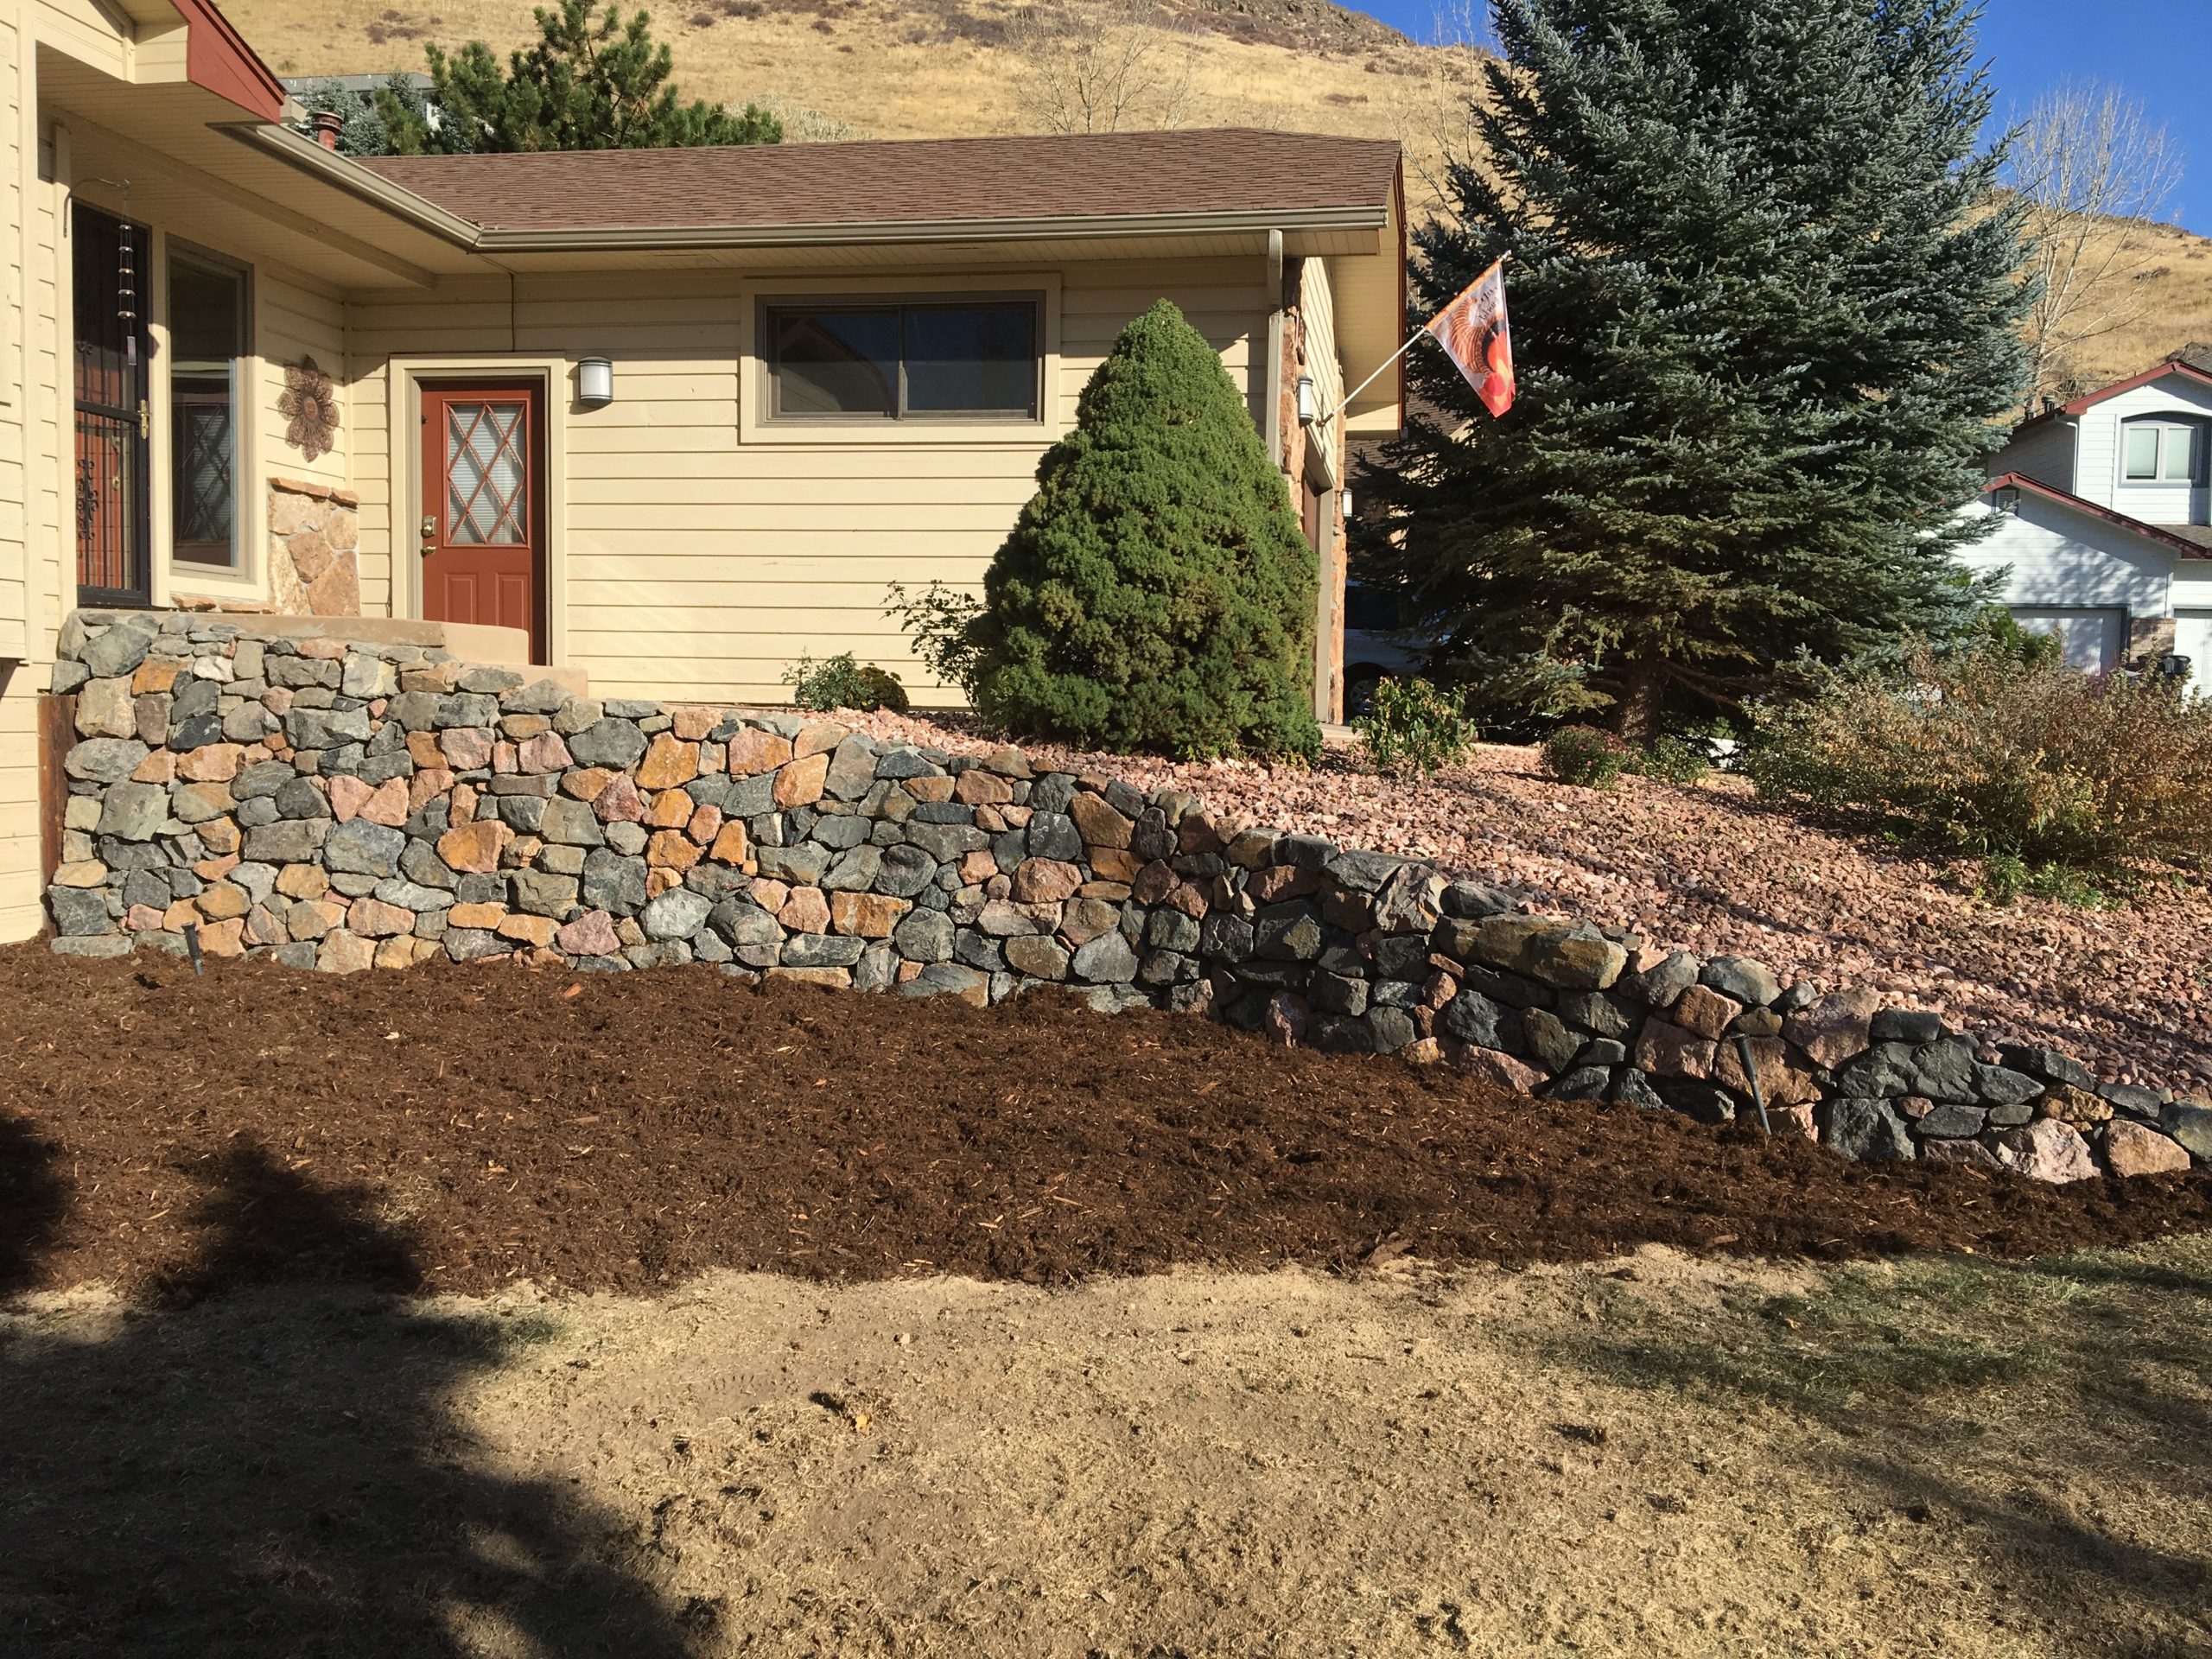 Natural rock retaining wall near entryway of house